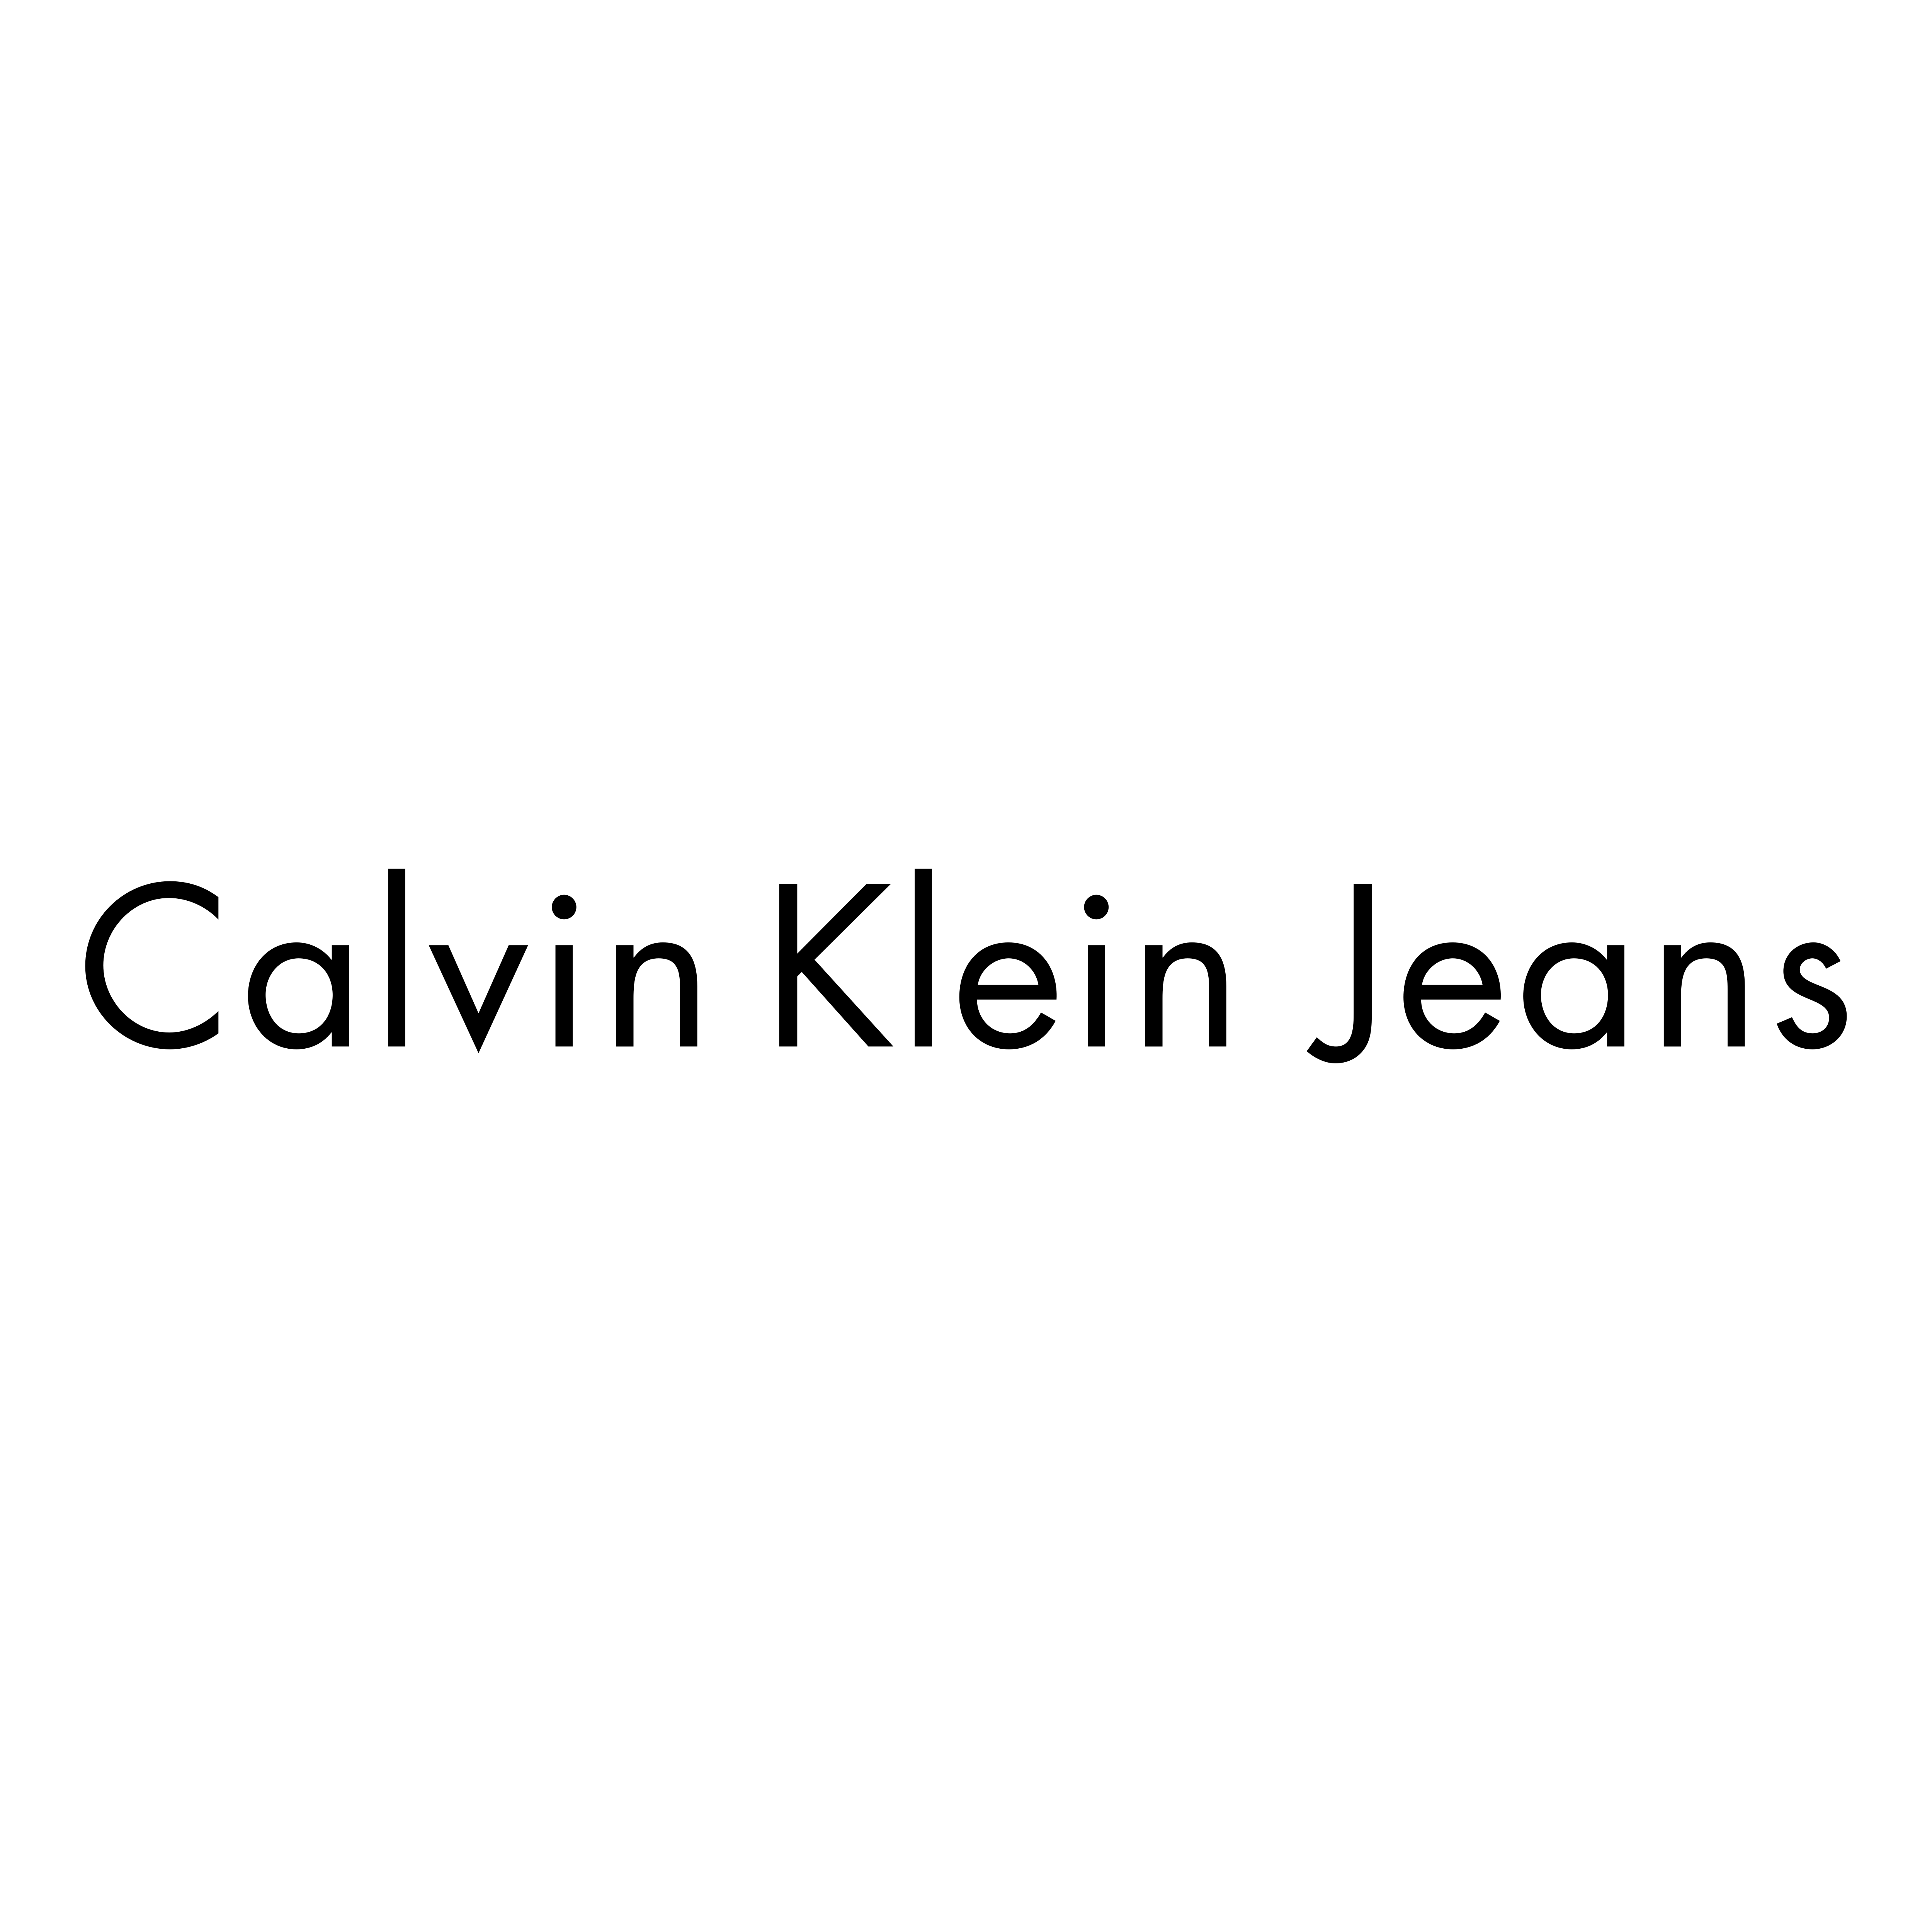 calvin klein jeans font Cheaper Than Retail Price> Buy Clothing